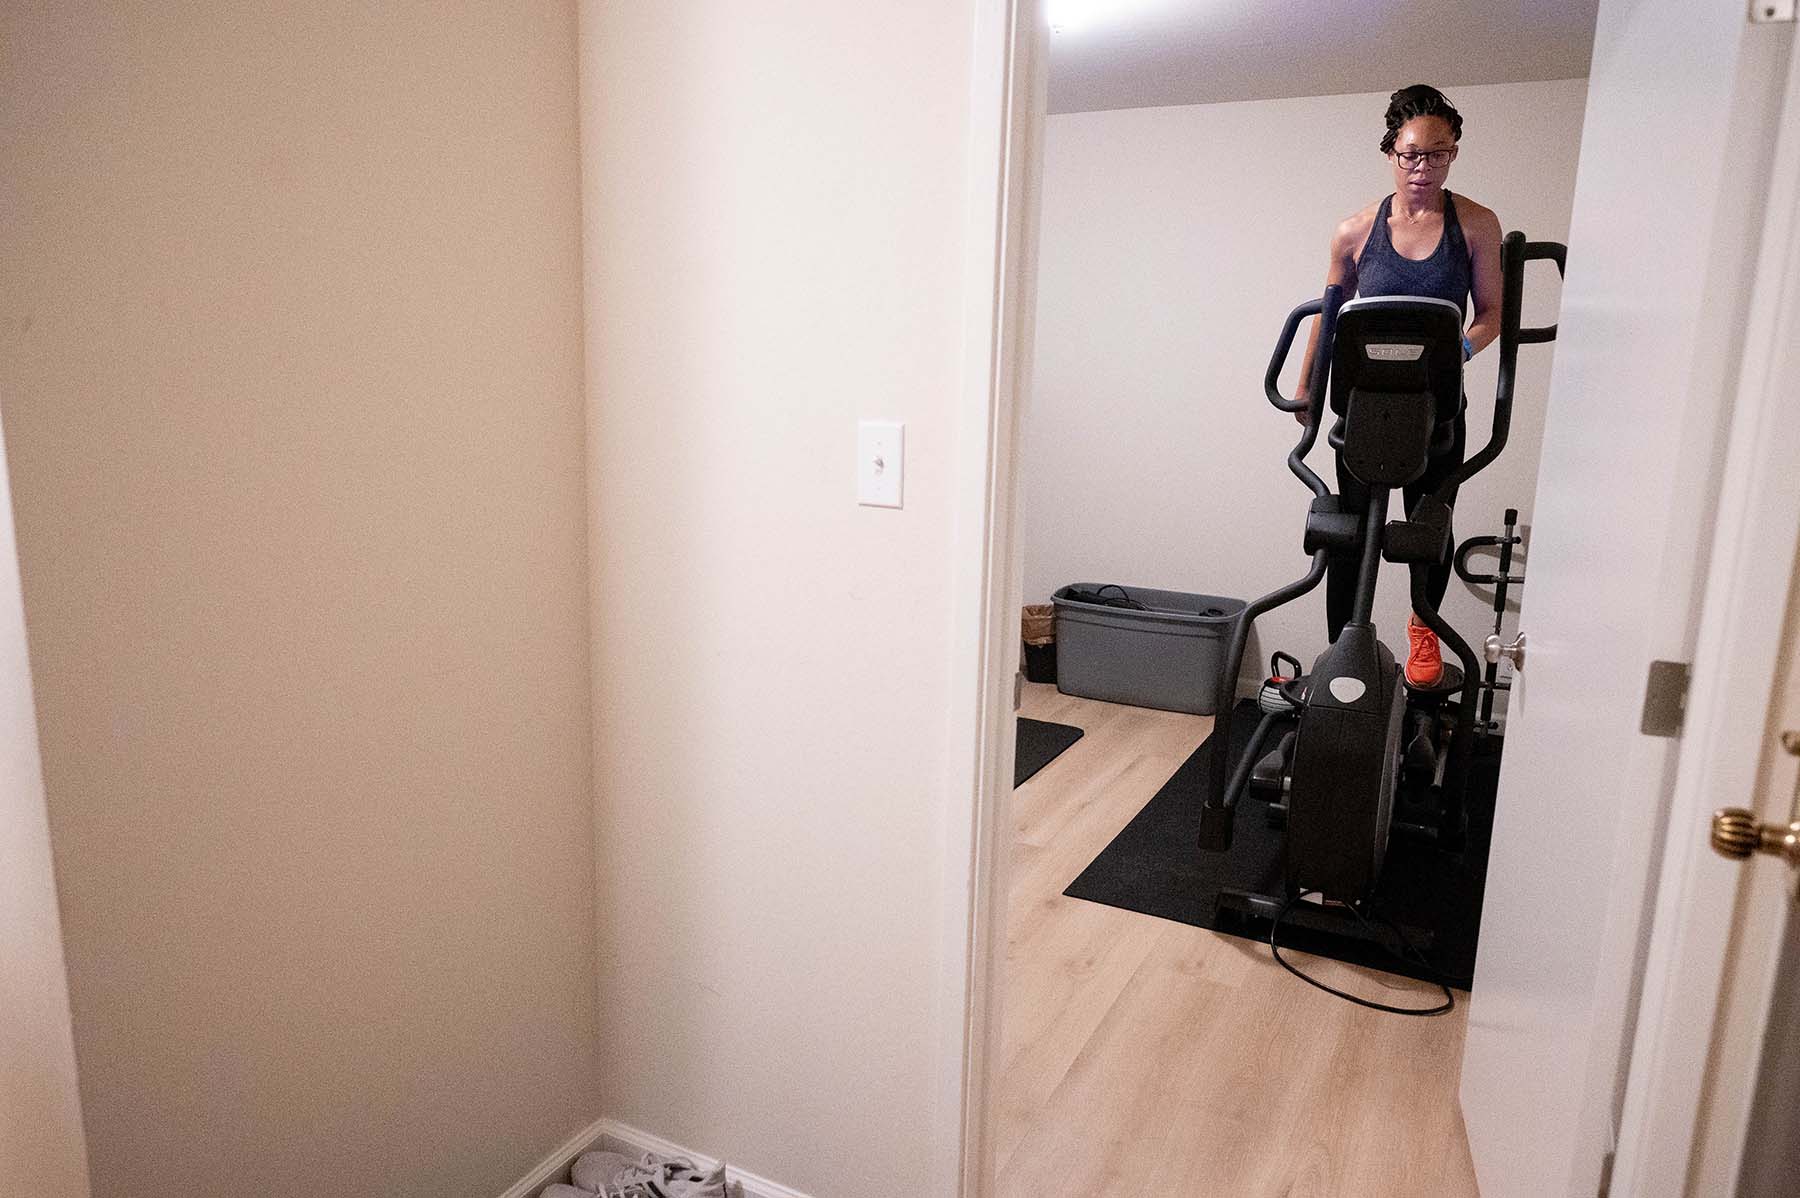 A young black woman named Kelechi Okpara exercises on an eliptical machine in her apartment early in the morning.